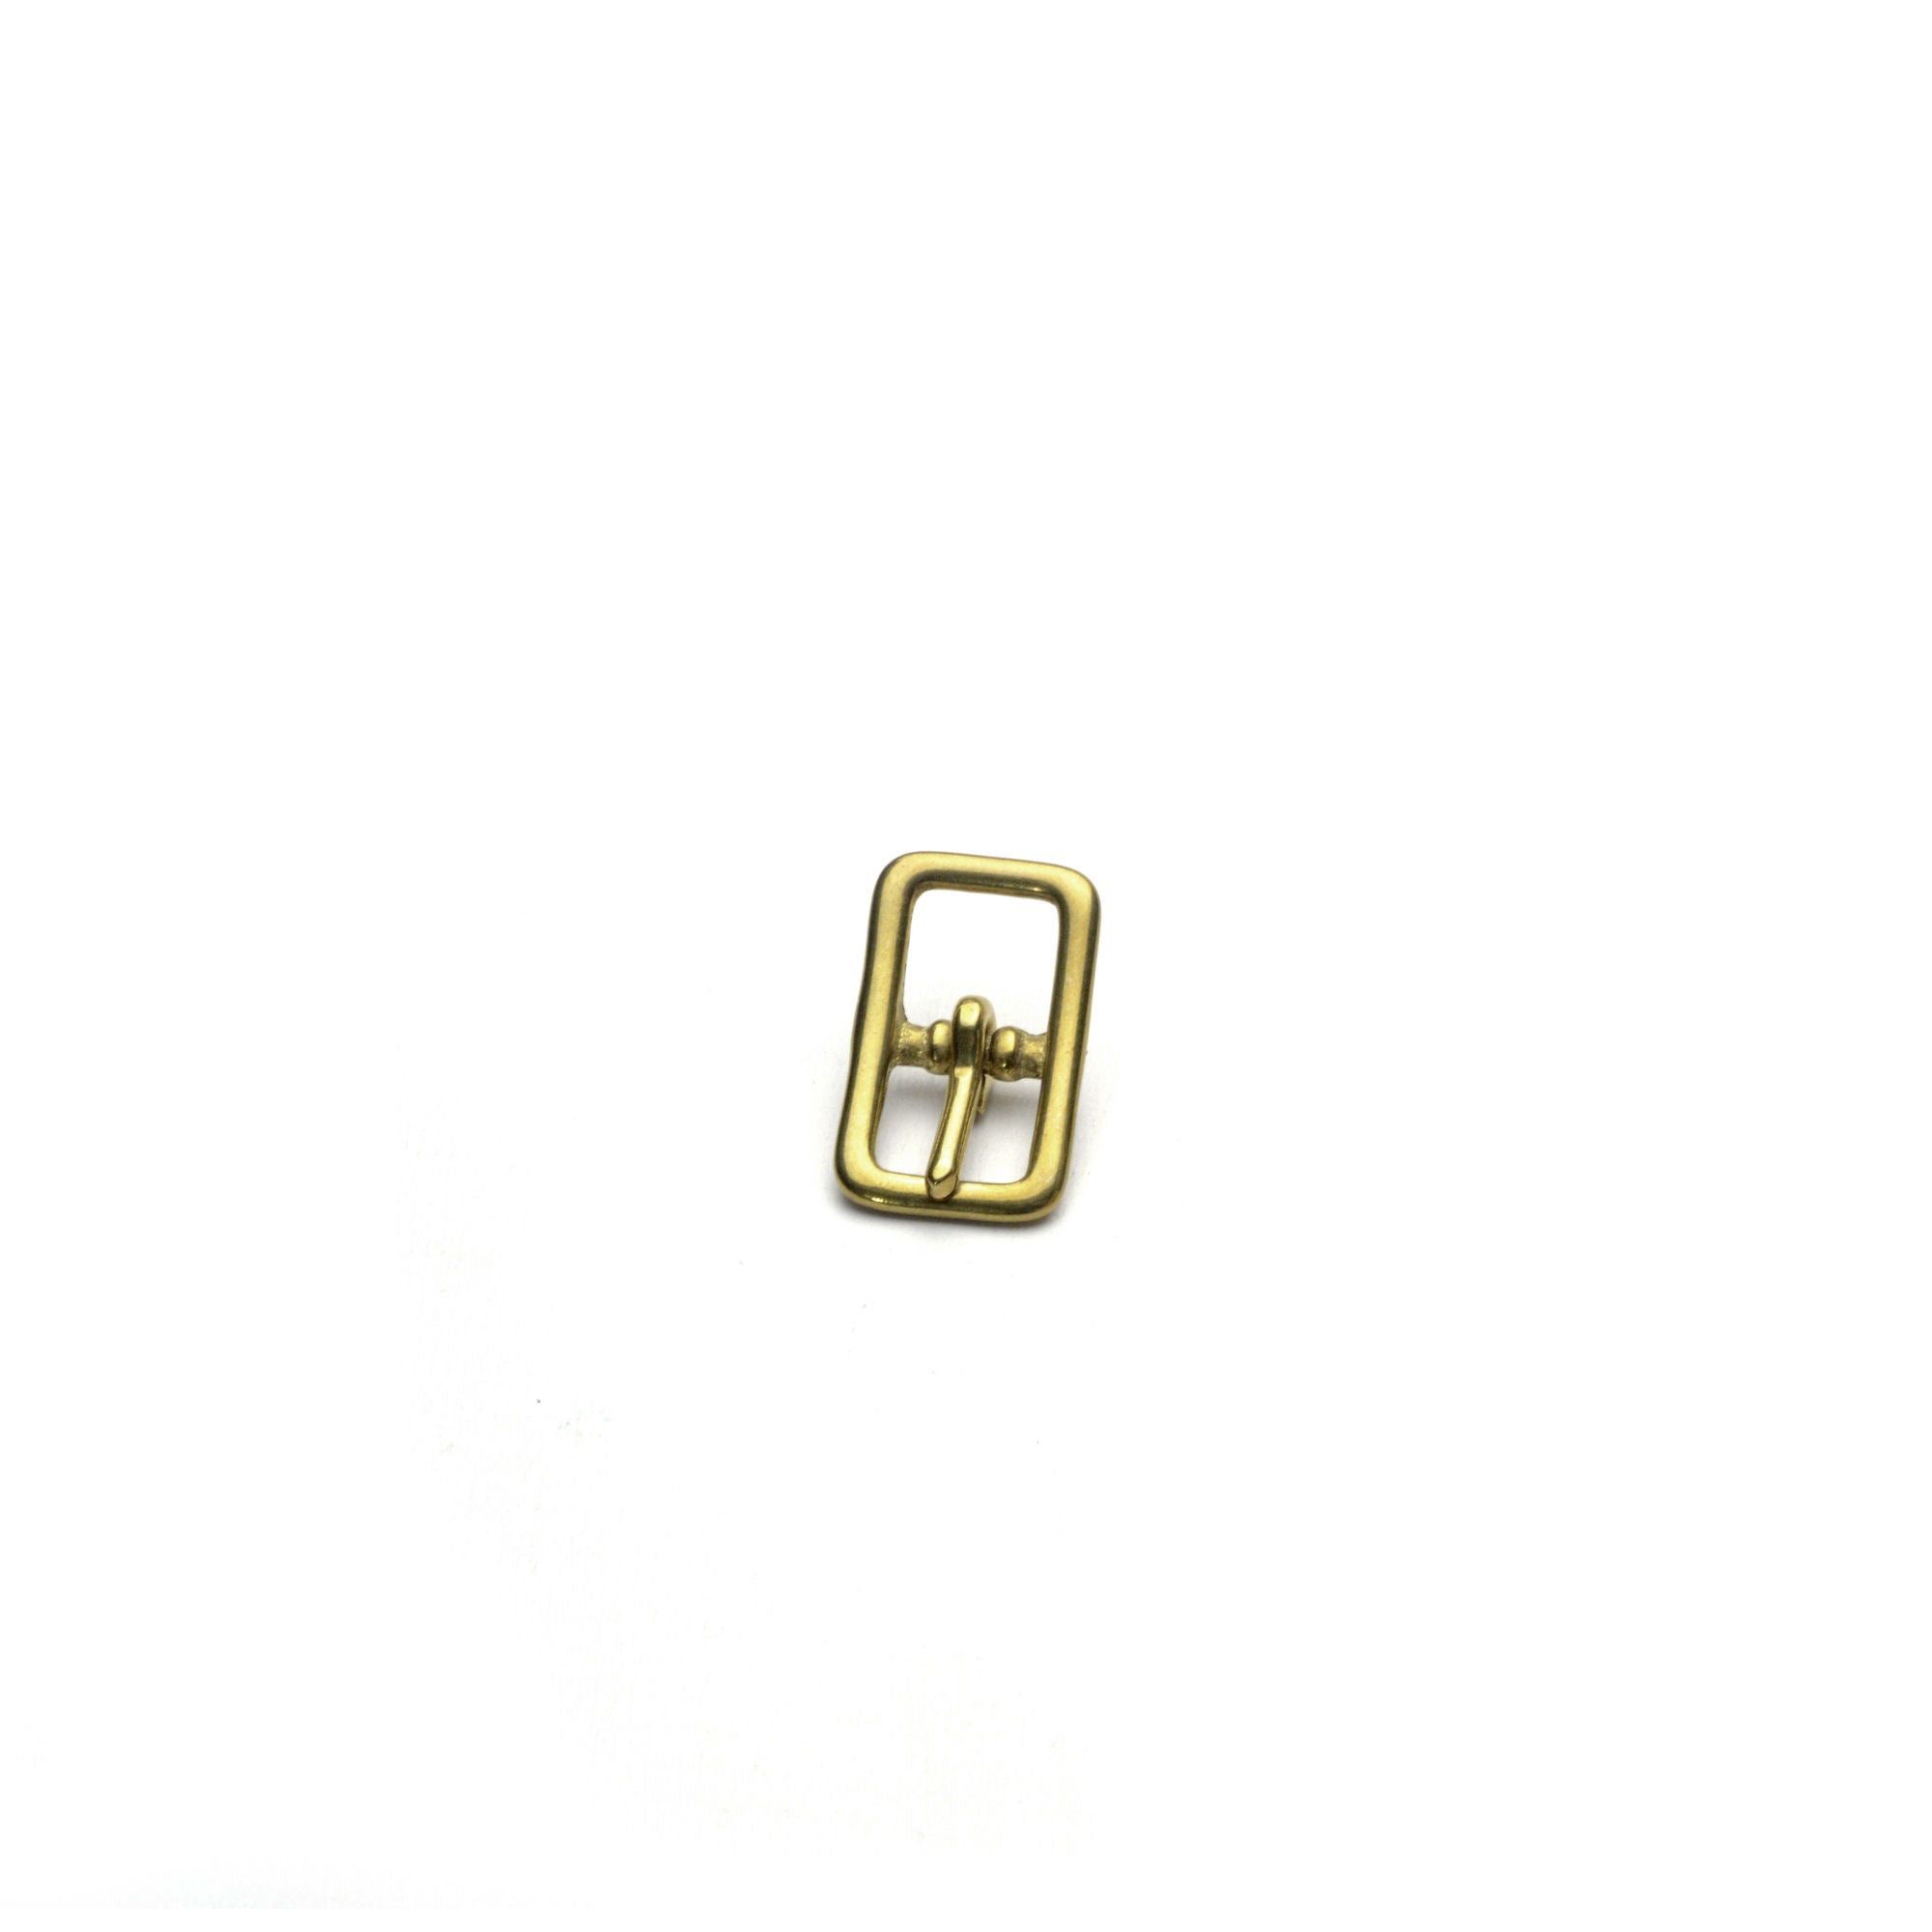 13mm Solid Brass Oblong Buckle from Identity Leathercraft